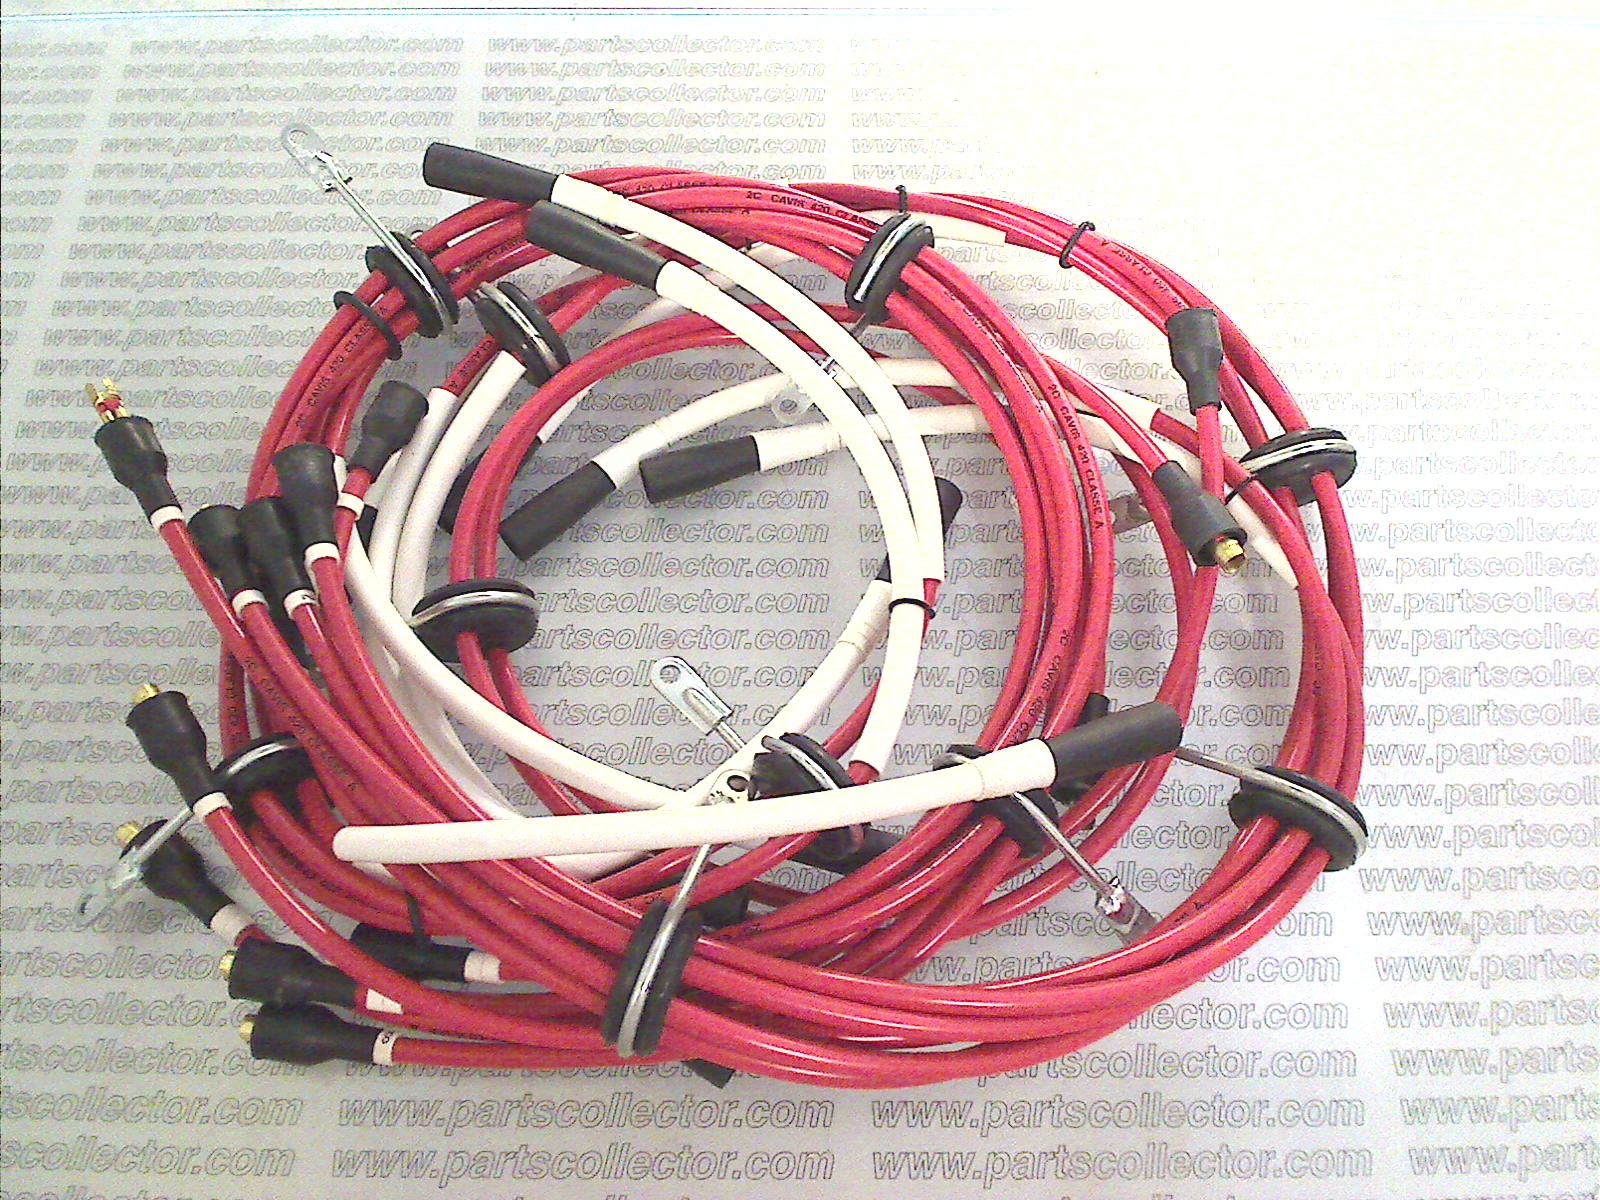 IGNITION WIRES